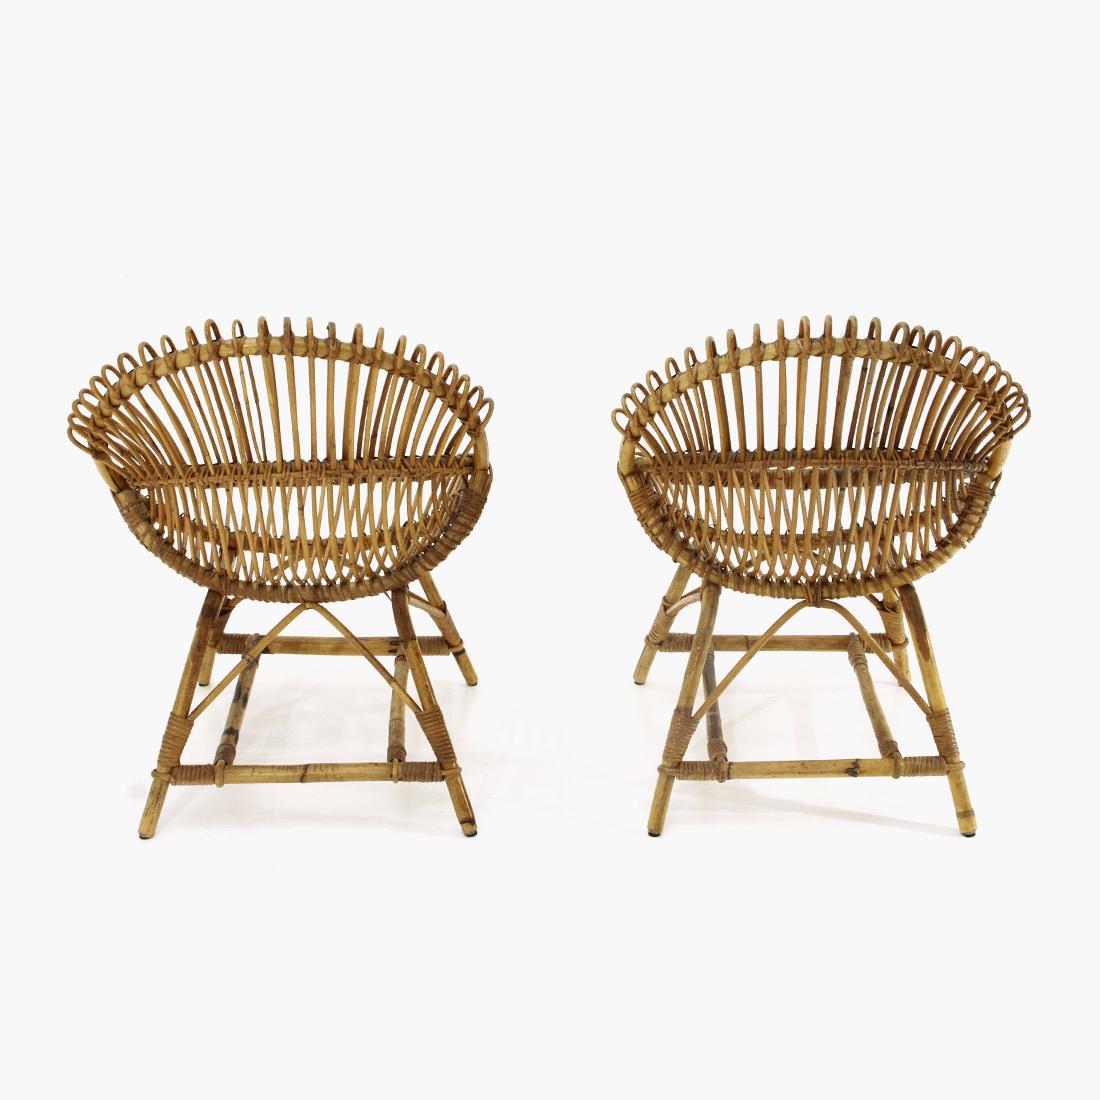 Pair of Rattan Armchairs, 1950s For Sale 1